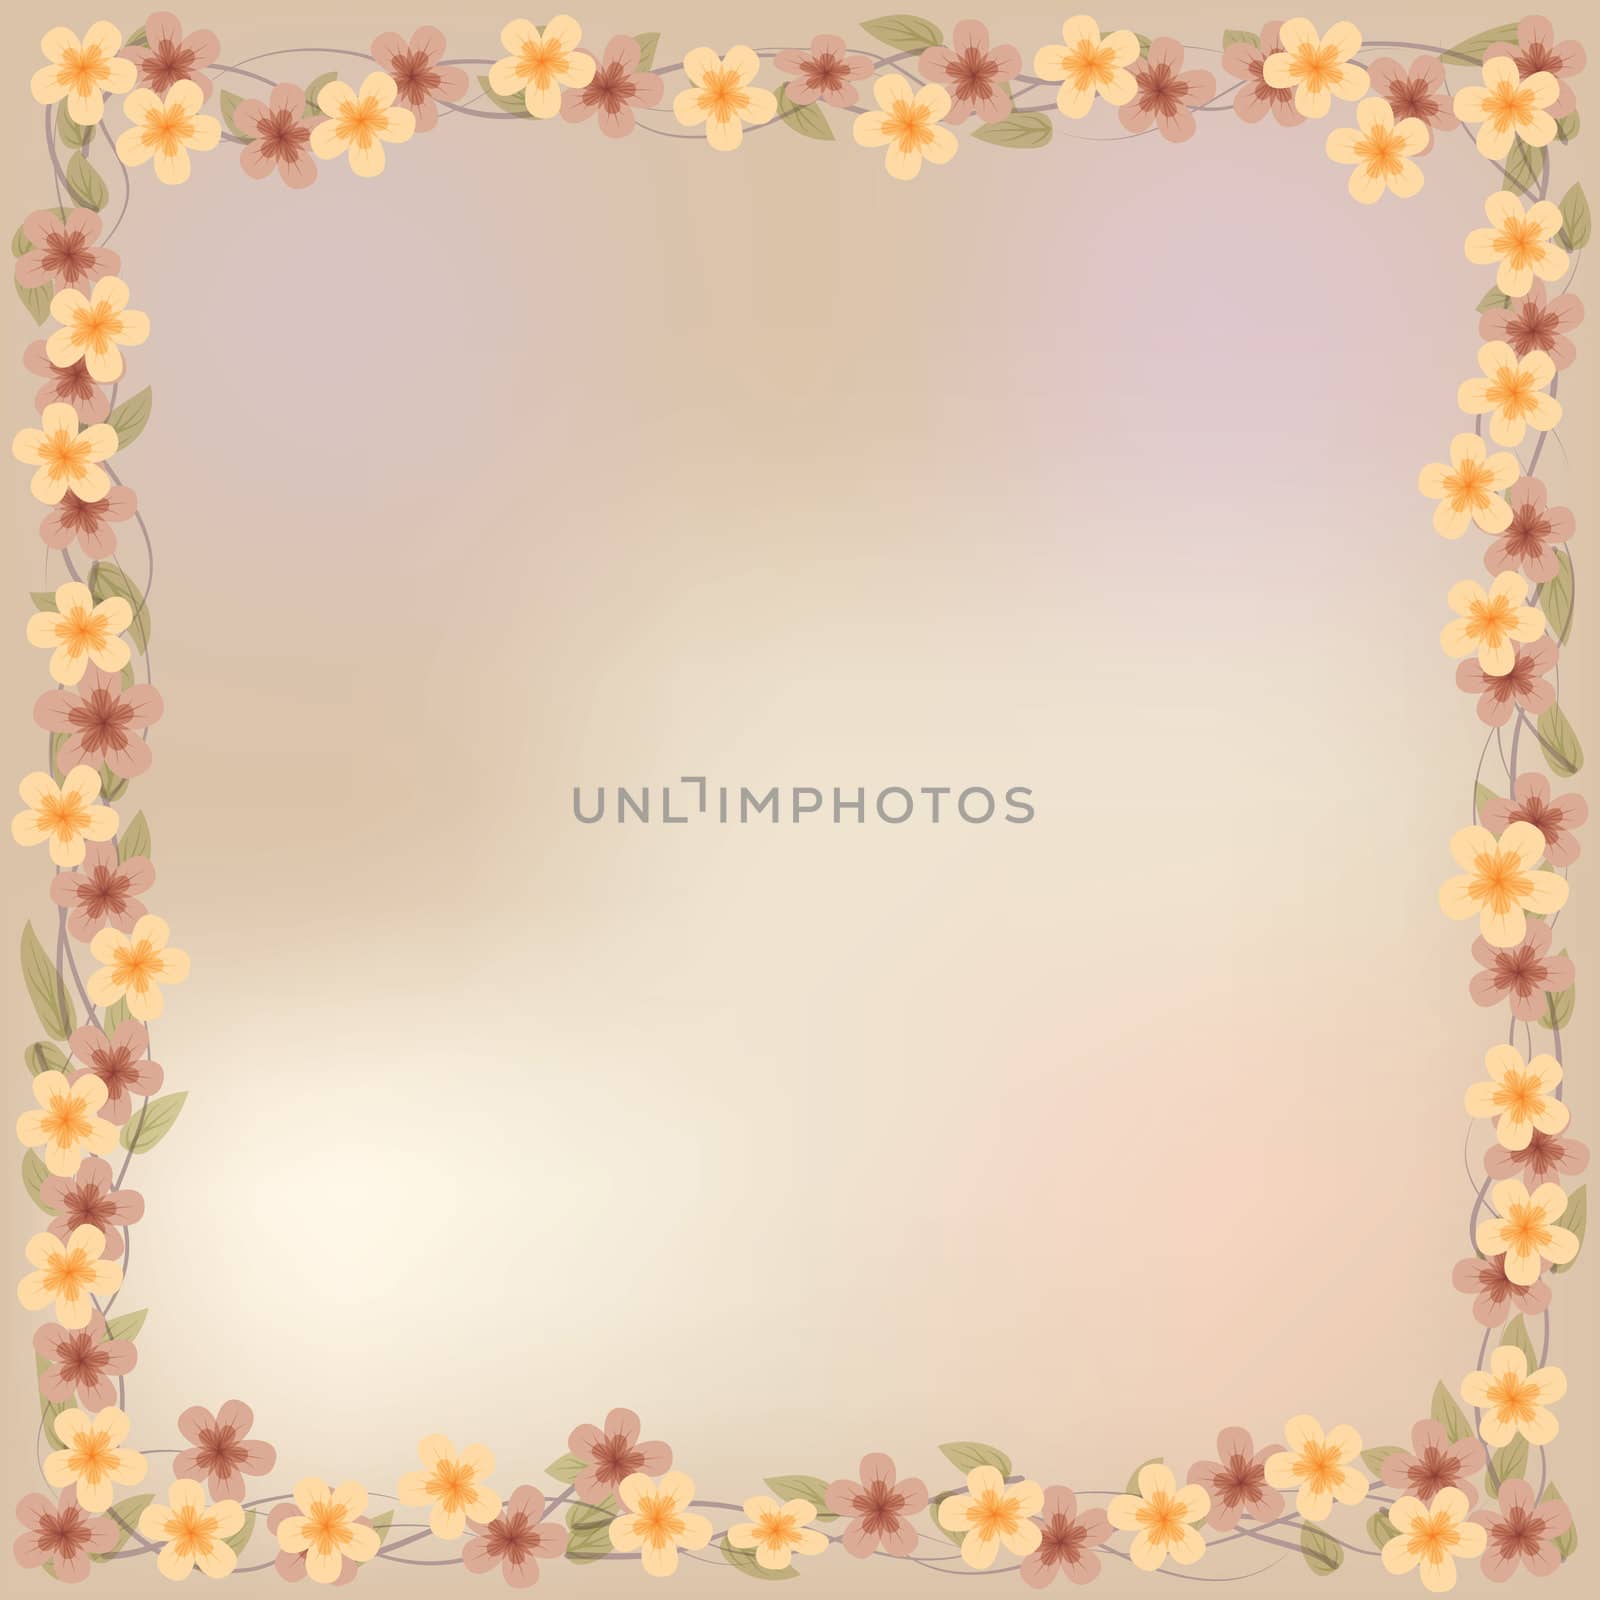 abstract floral illustration with flowers on beige background